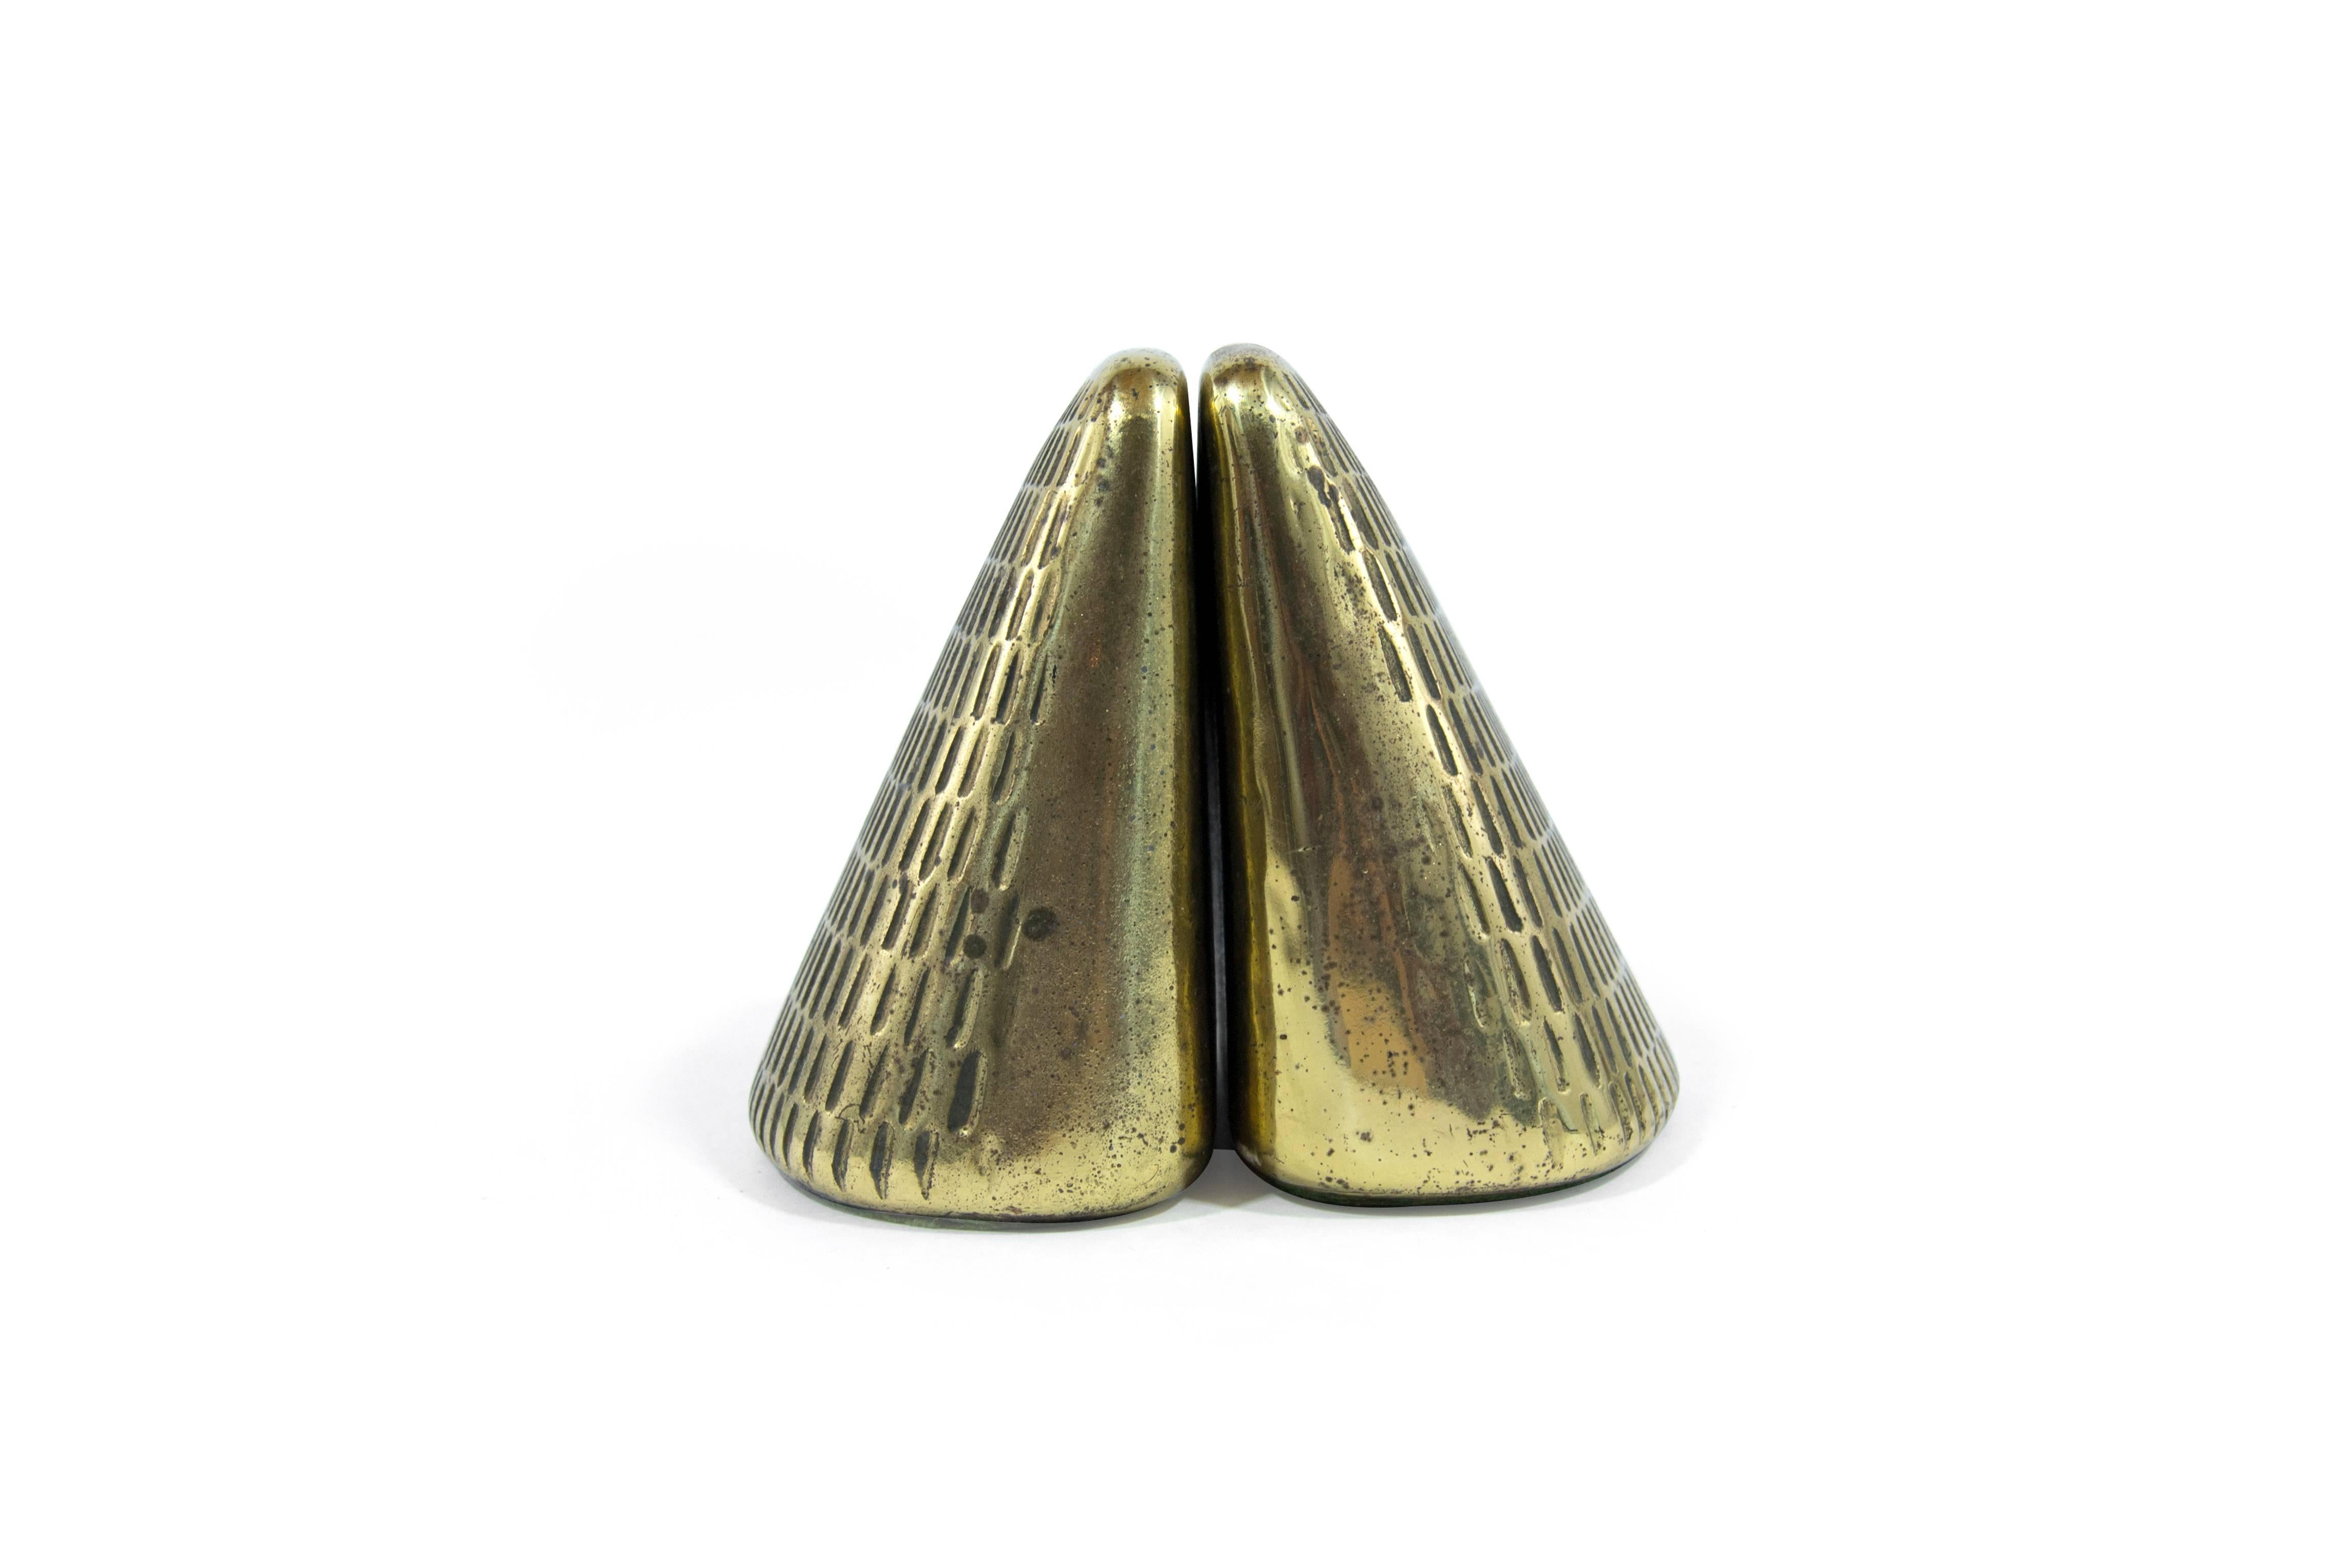 Mid-Century Modern Pyramid Bookends by Ben Seibel for Jenfred Ware